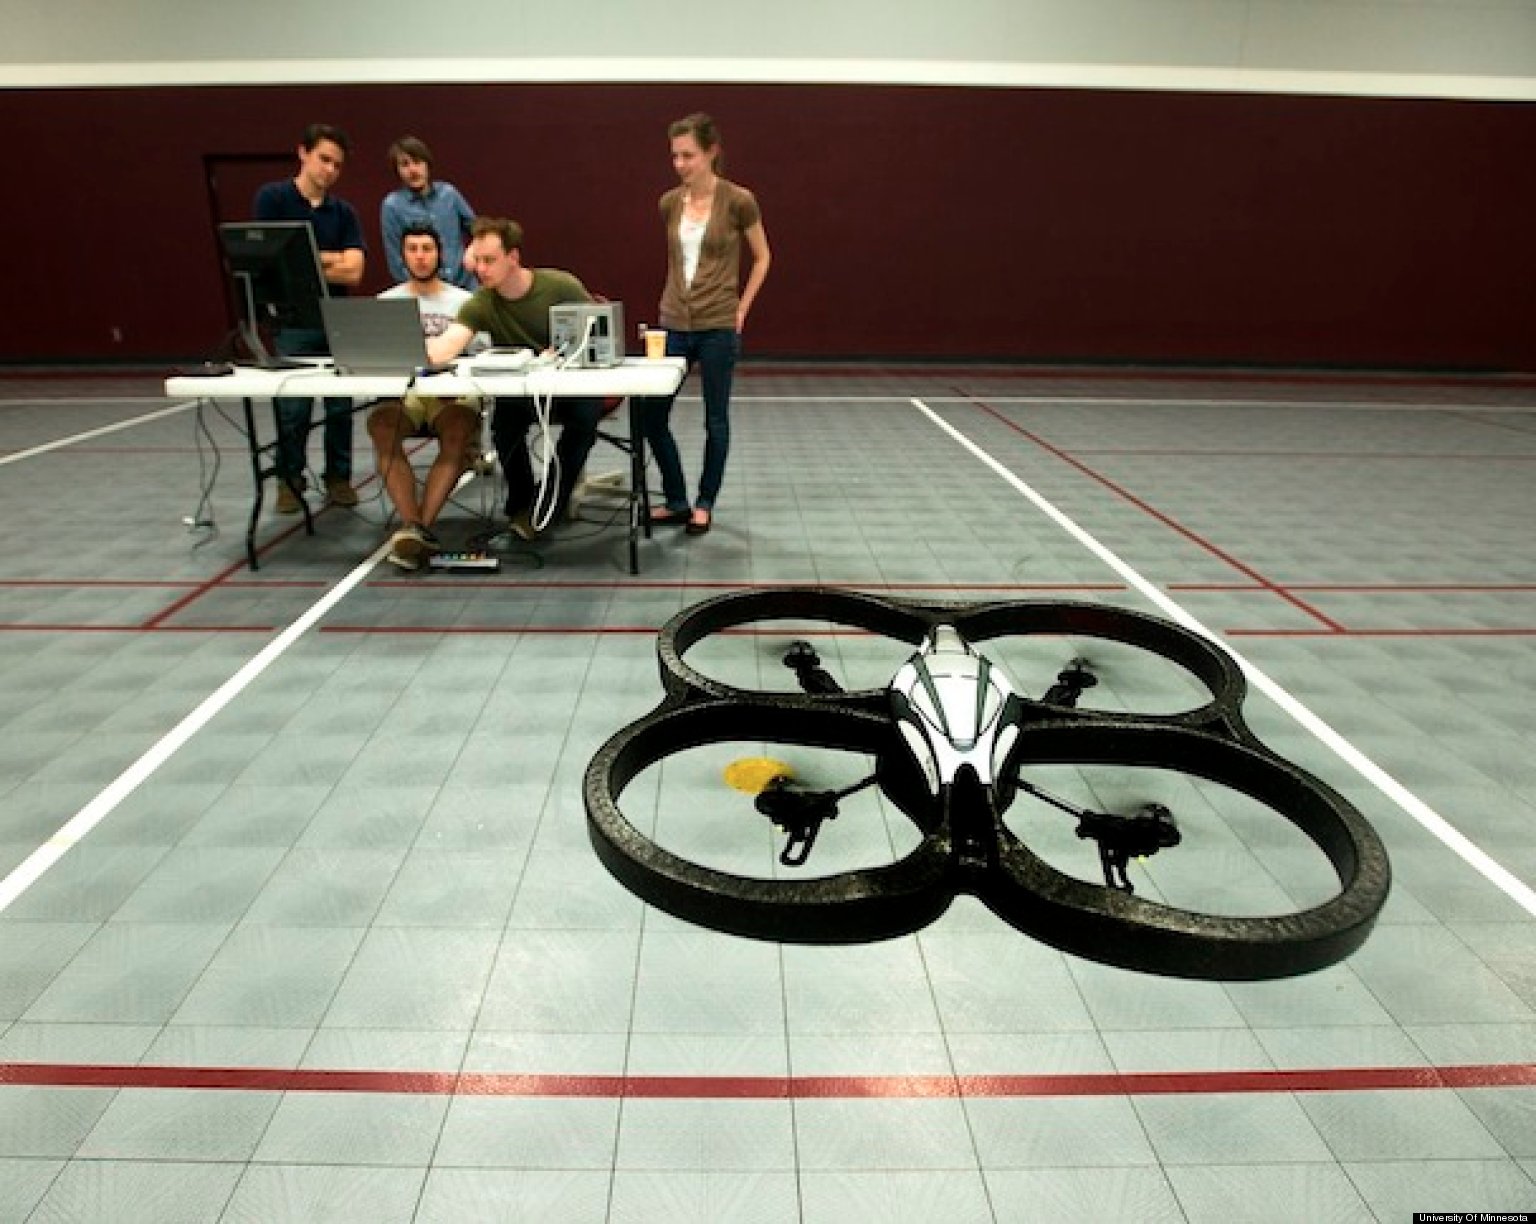 Mind-controlled Flying Robot Successfully Tested